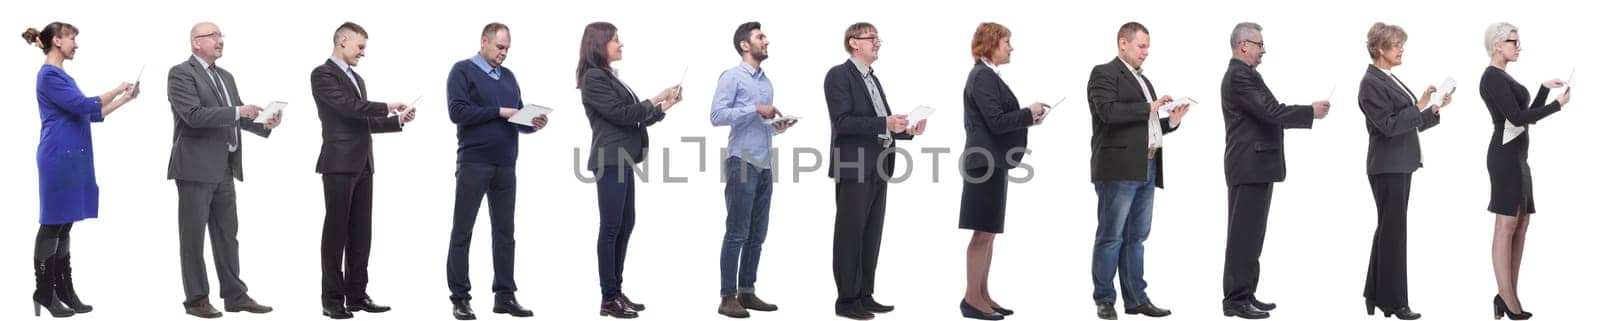 group of people holding tablet and looking ahead by asdf